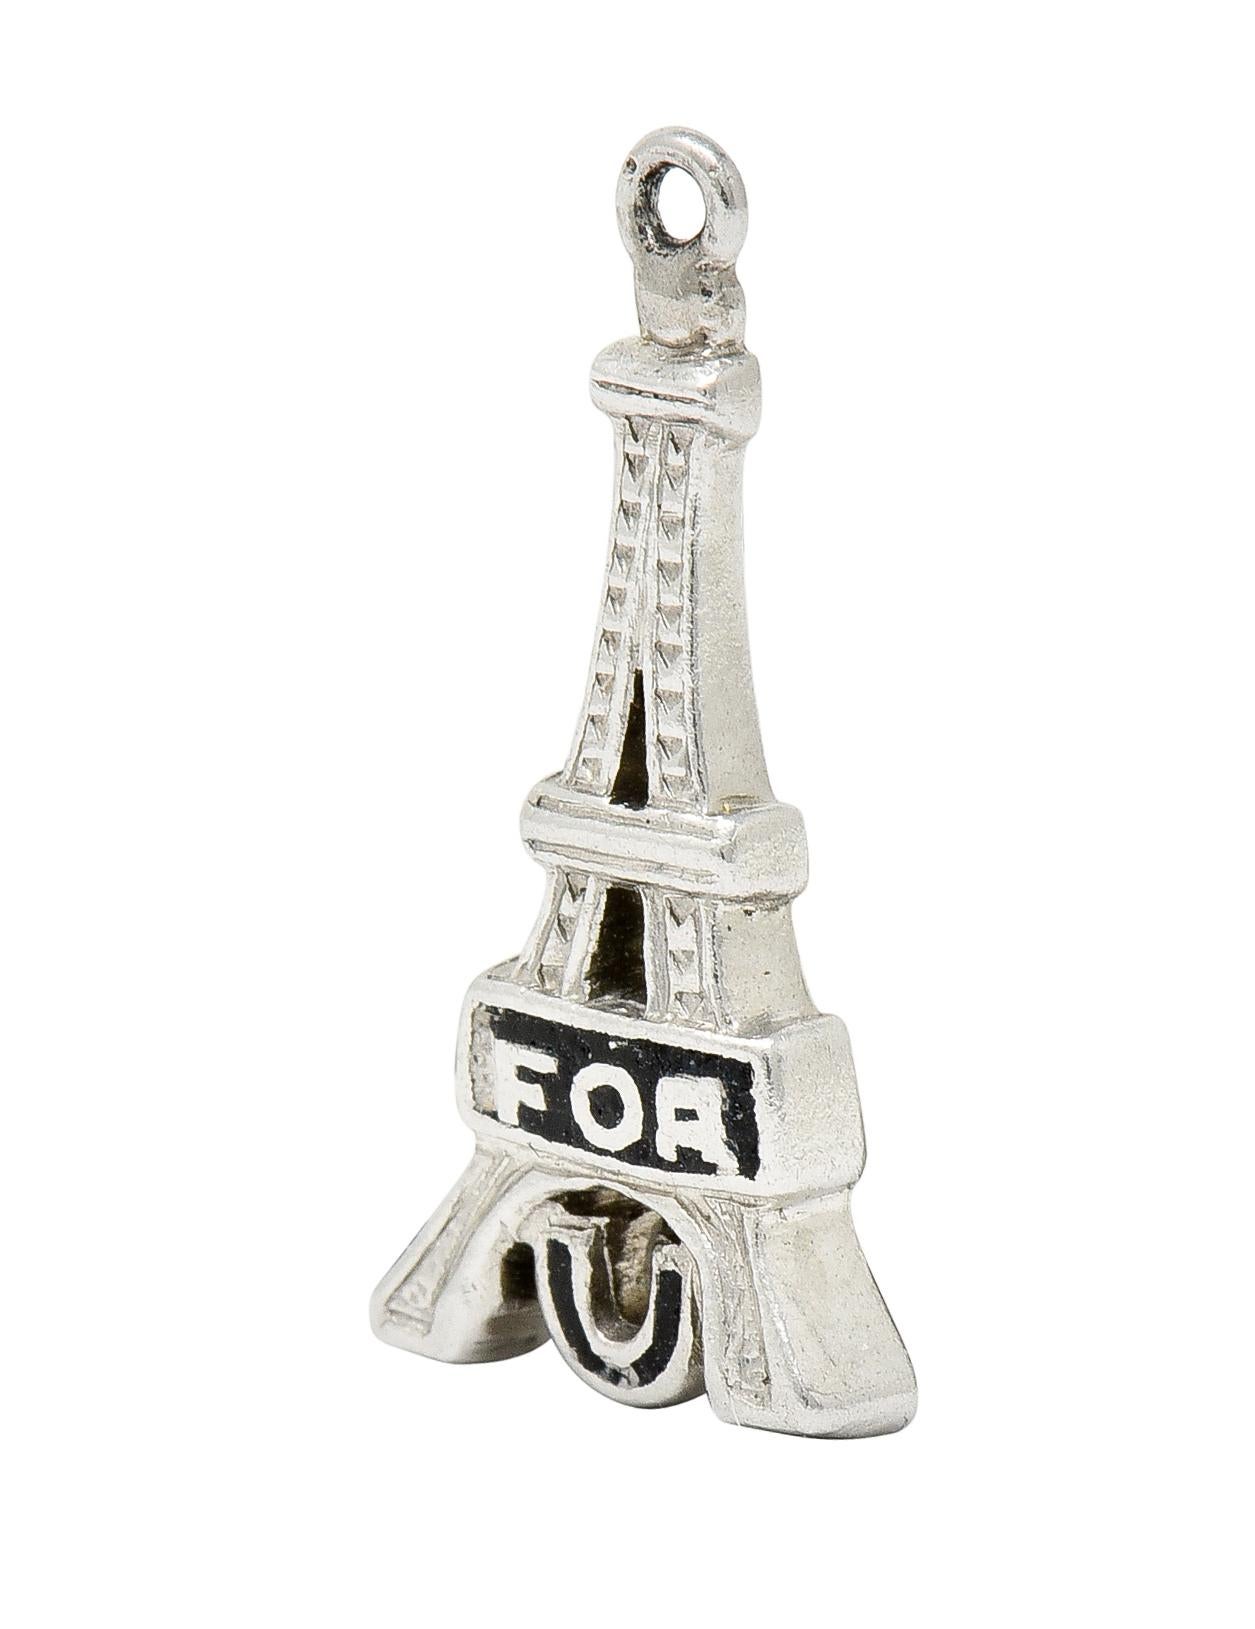 Charm is designed as a highly rendered Eiffel Tower

Featuring the enameled words 'FOR' and 'U', exhibiting some loss; consistent with age, wear, and use

Creating the clever visual pun of 